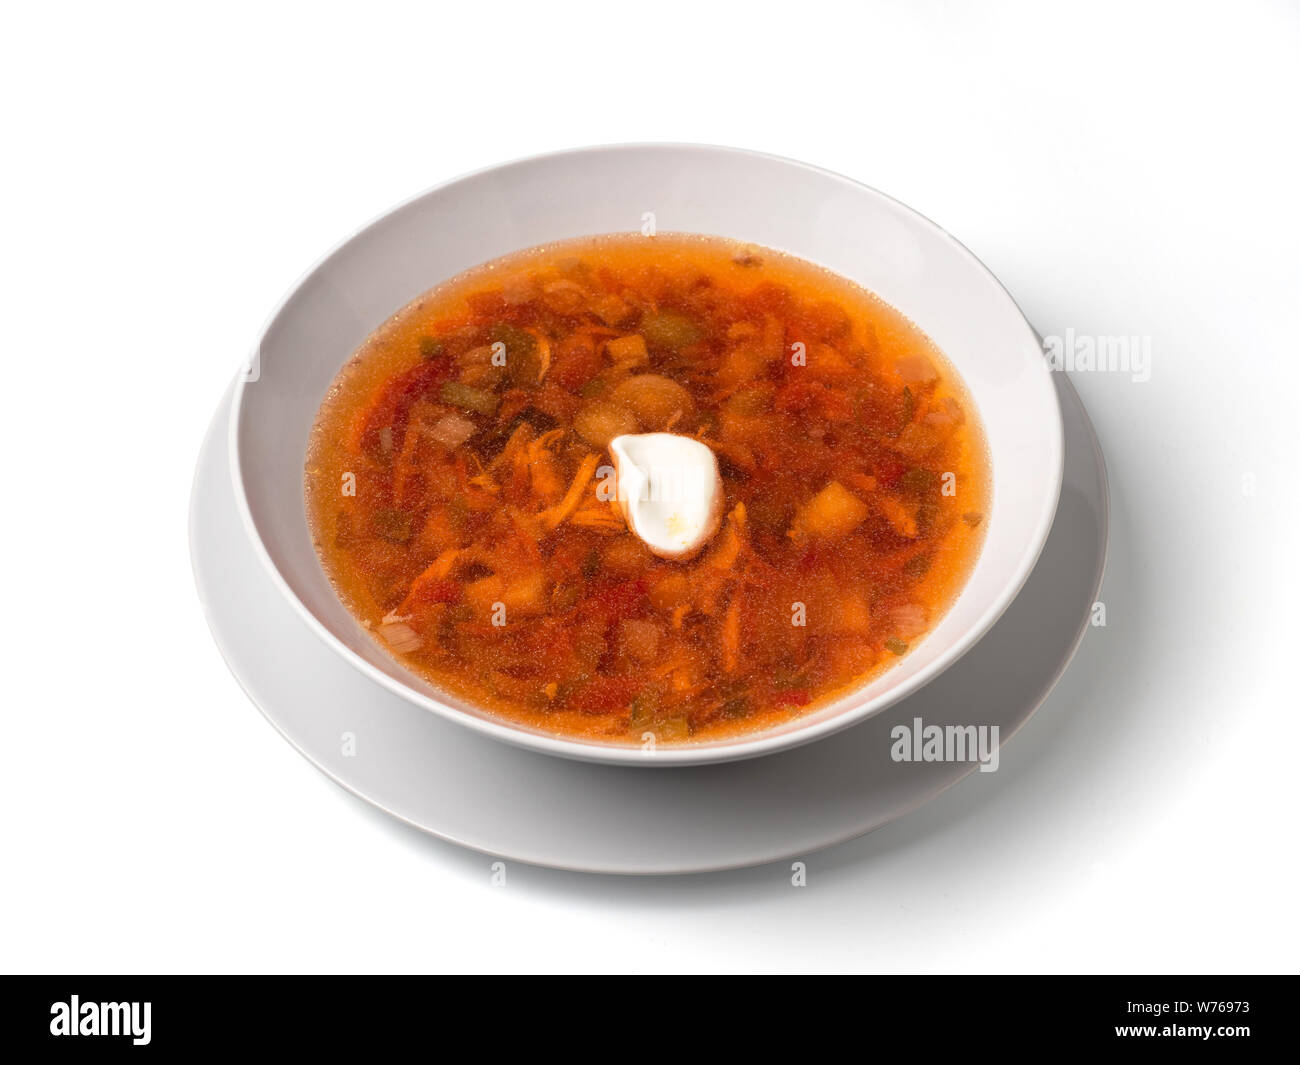 Soup with chicken meat, potatoes, carrot, tomatoes in bowl. Plate of orange red russian-style soup isolated on white. Isolated on white with clipping path. Stock Photo